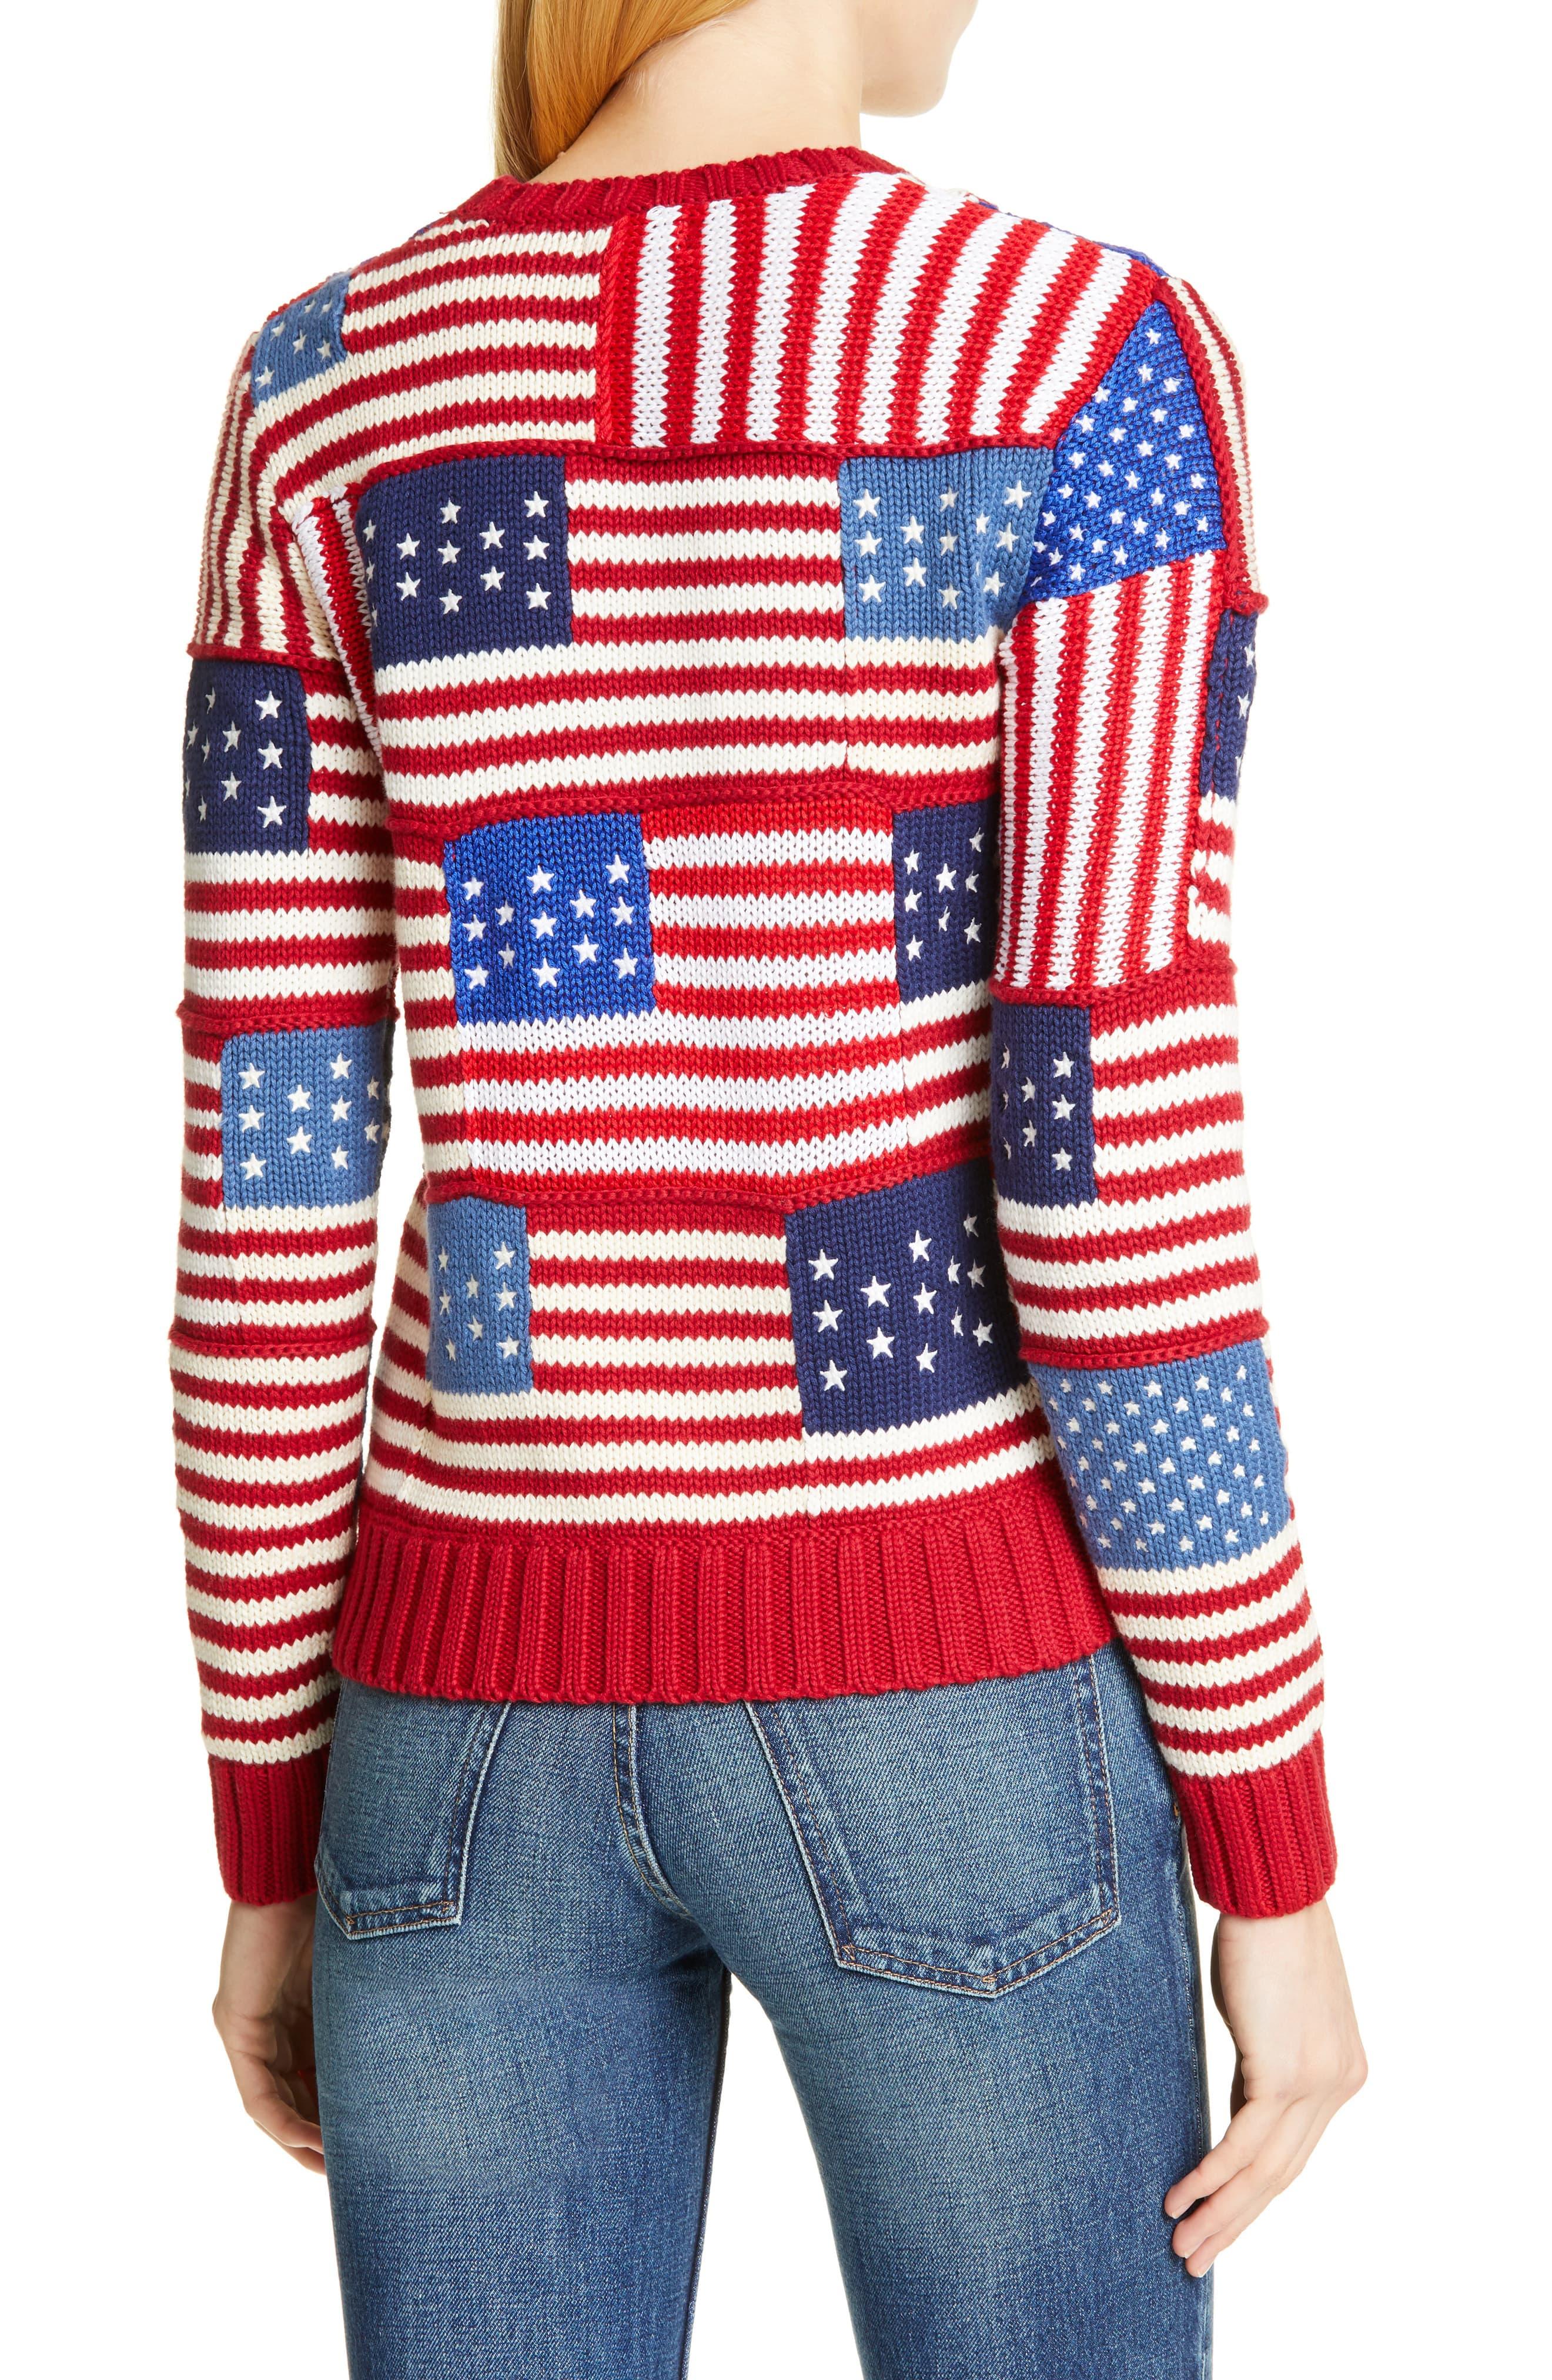 Polo Ralph Lauren Patchwork Flag Sweater in Red - Lyst